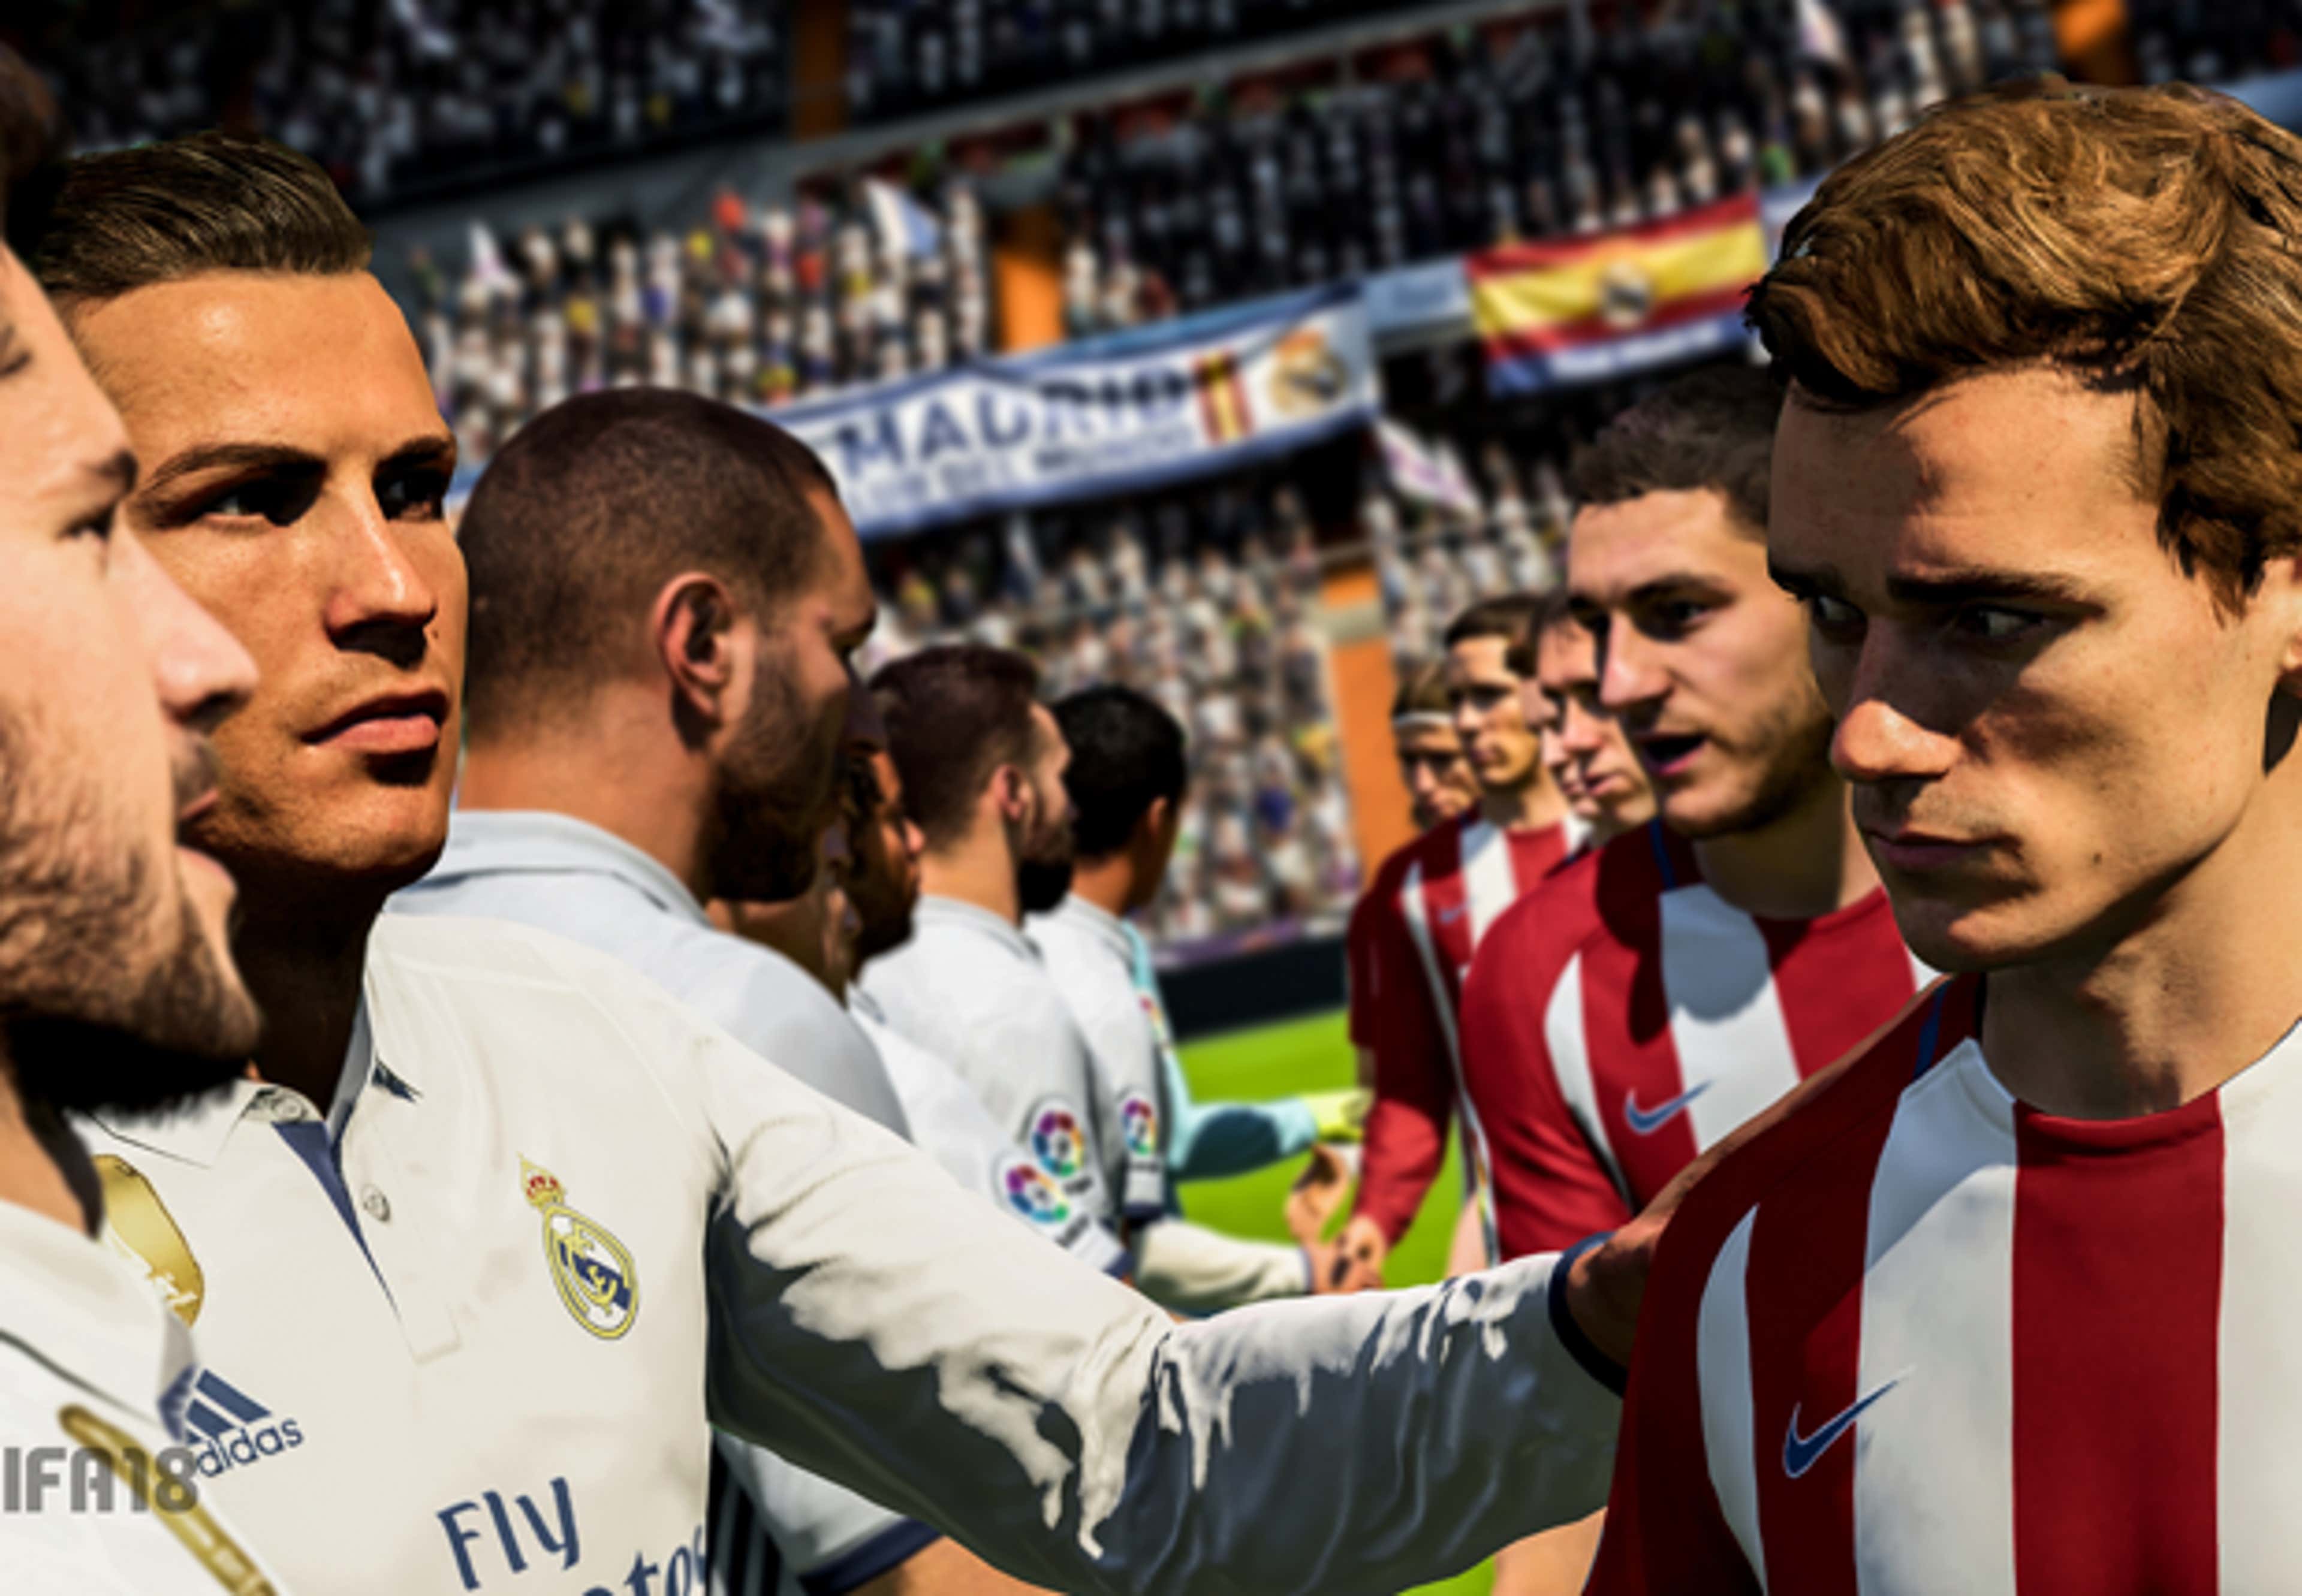  FIFA 18 for PlayStation 3 : Everything Else